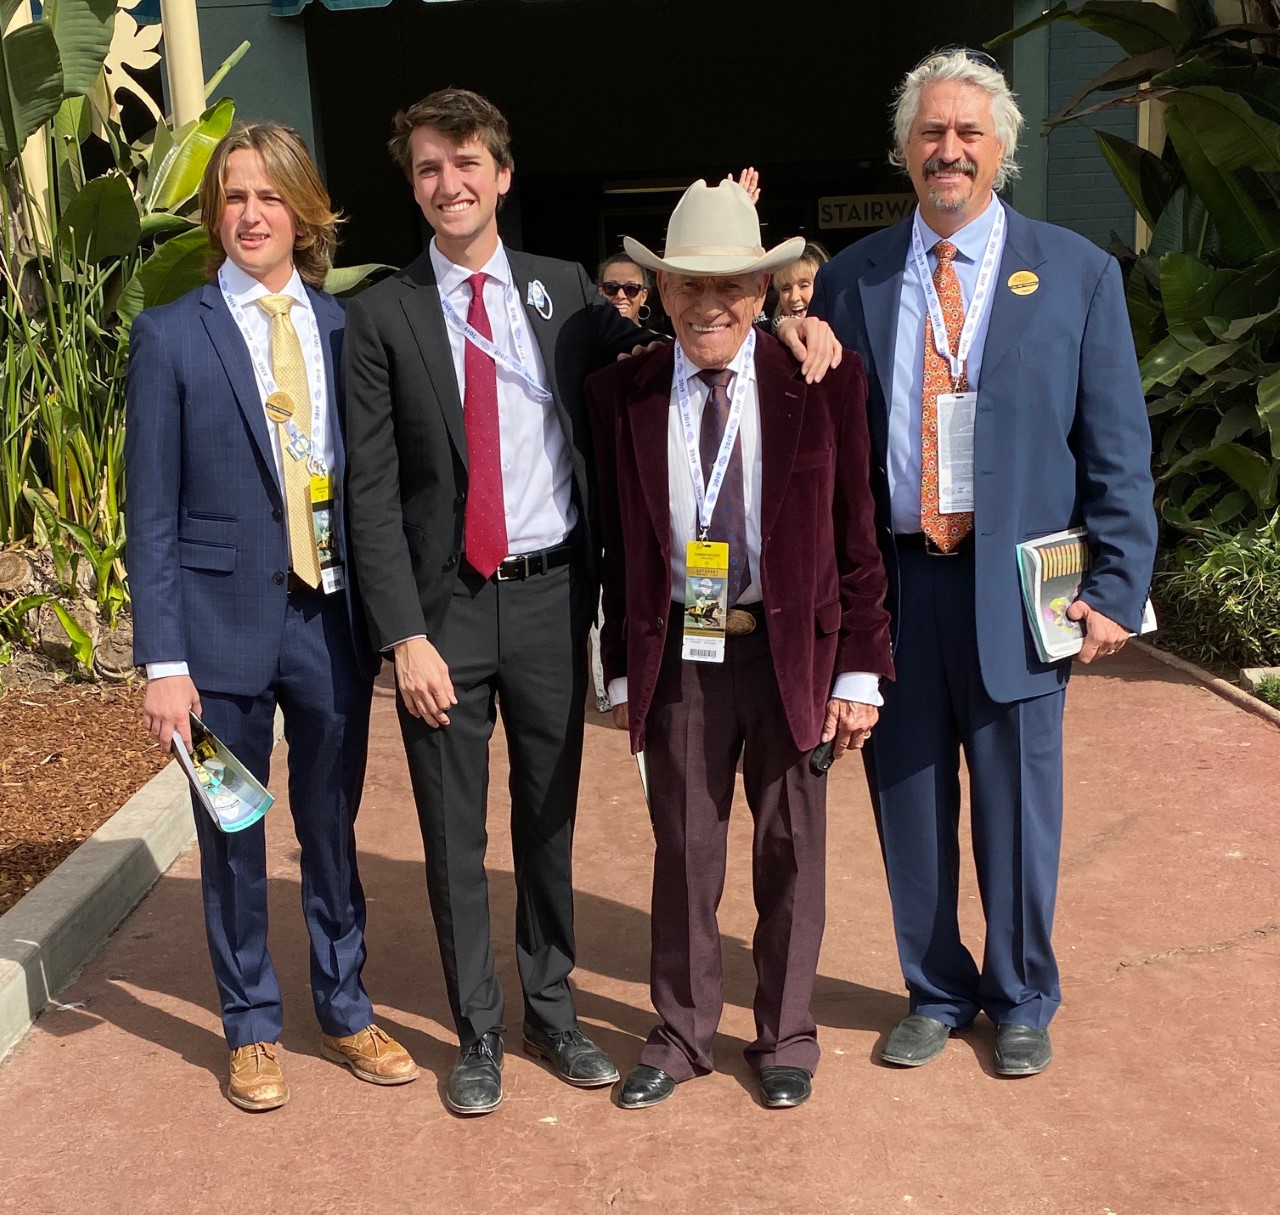 At the Breeders’ Cup: Steve Asmussen (right) with father Keith and sons Eric and Keith Jr